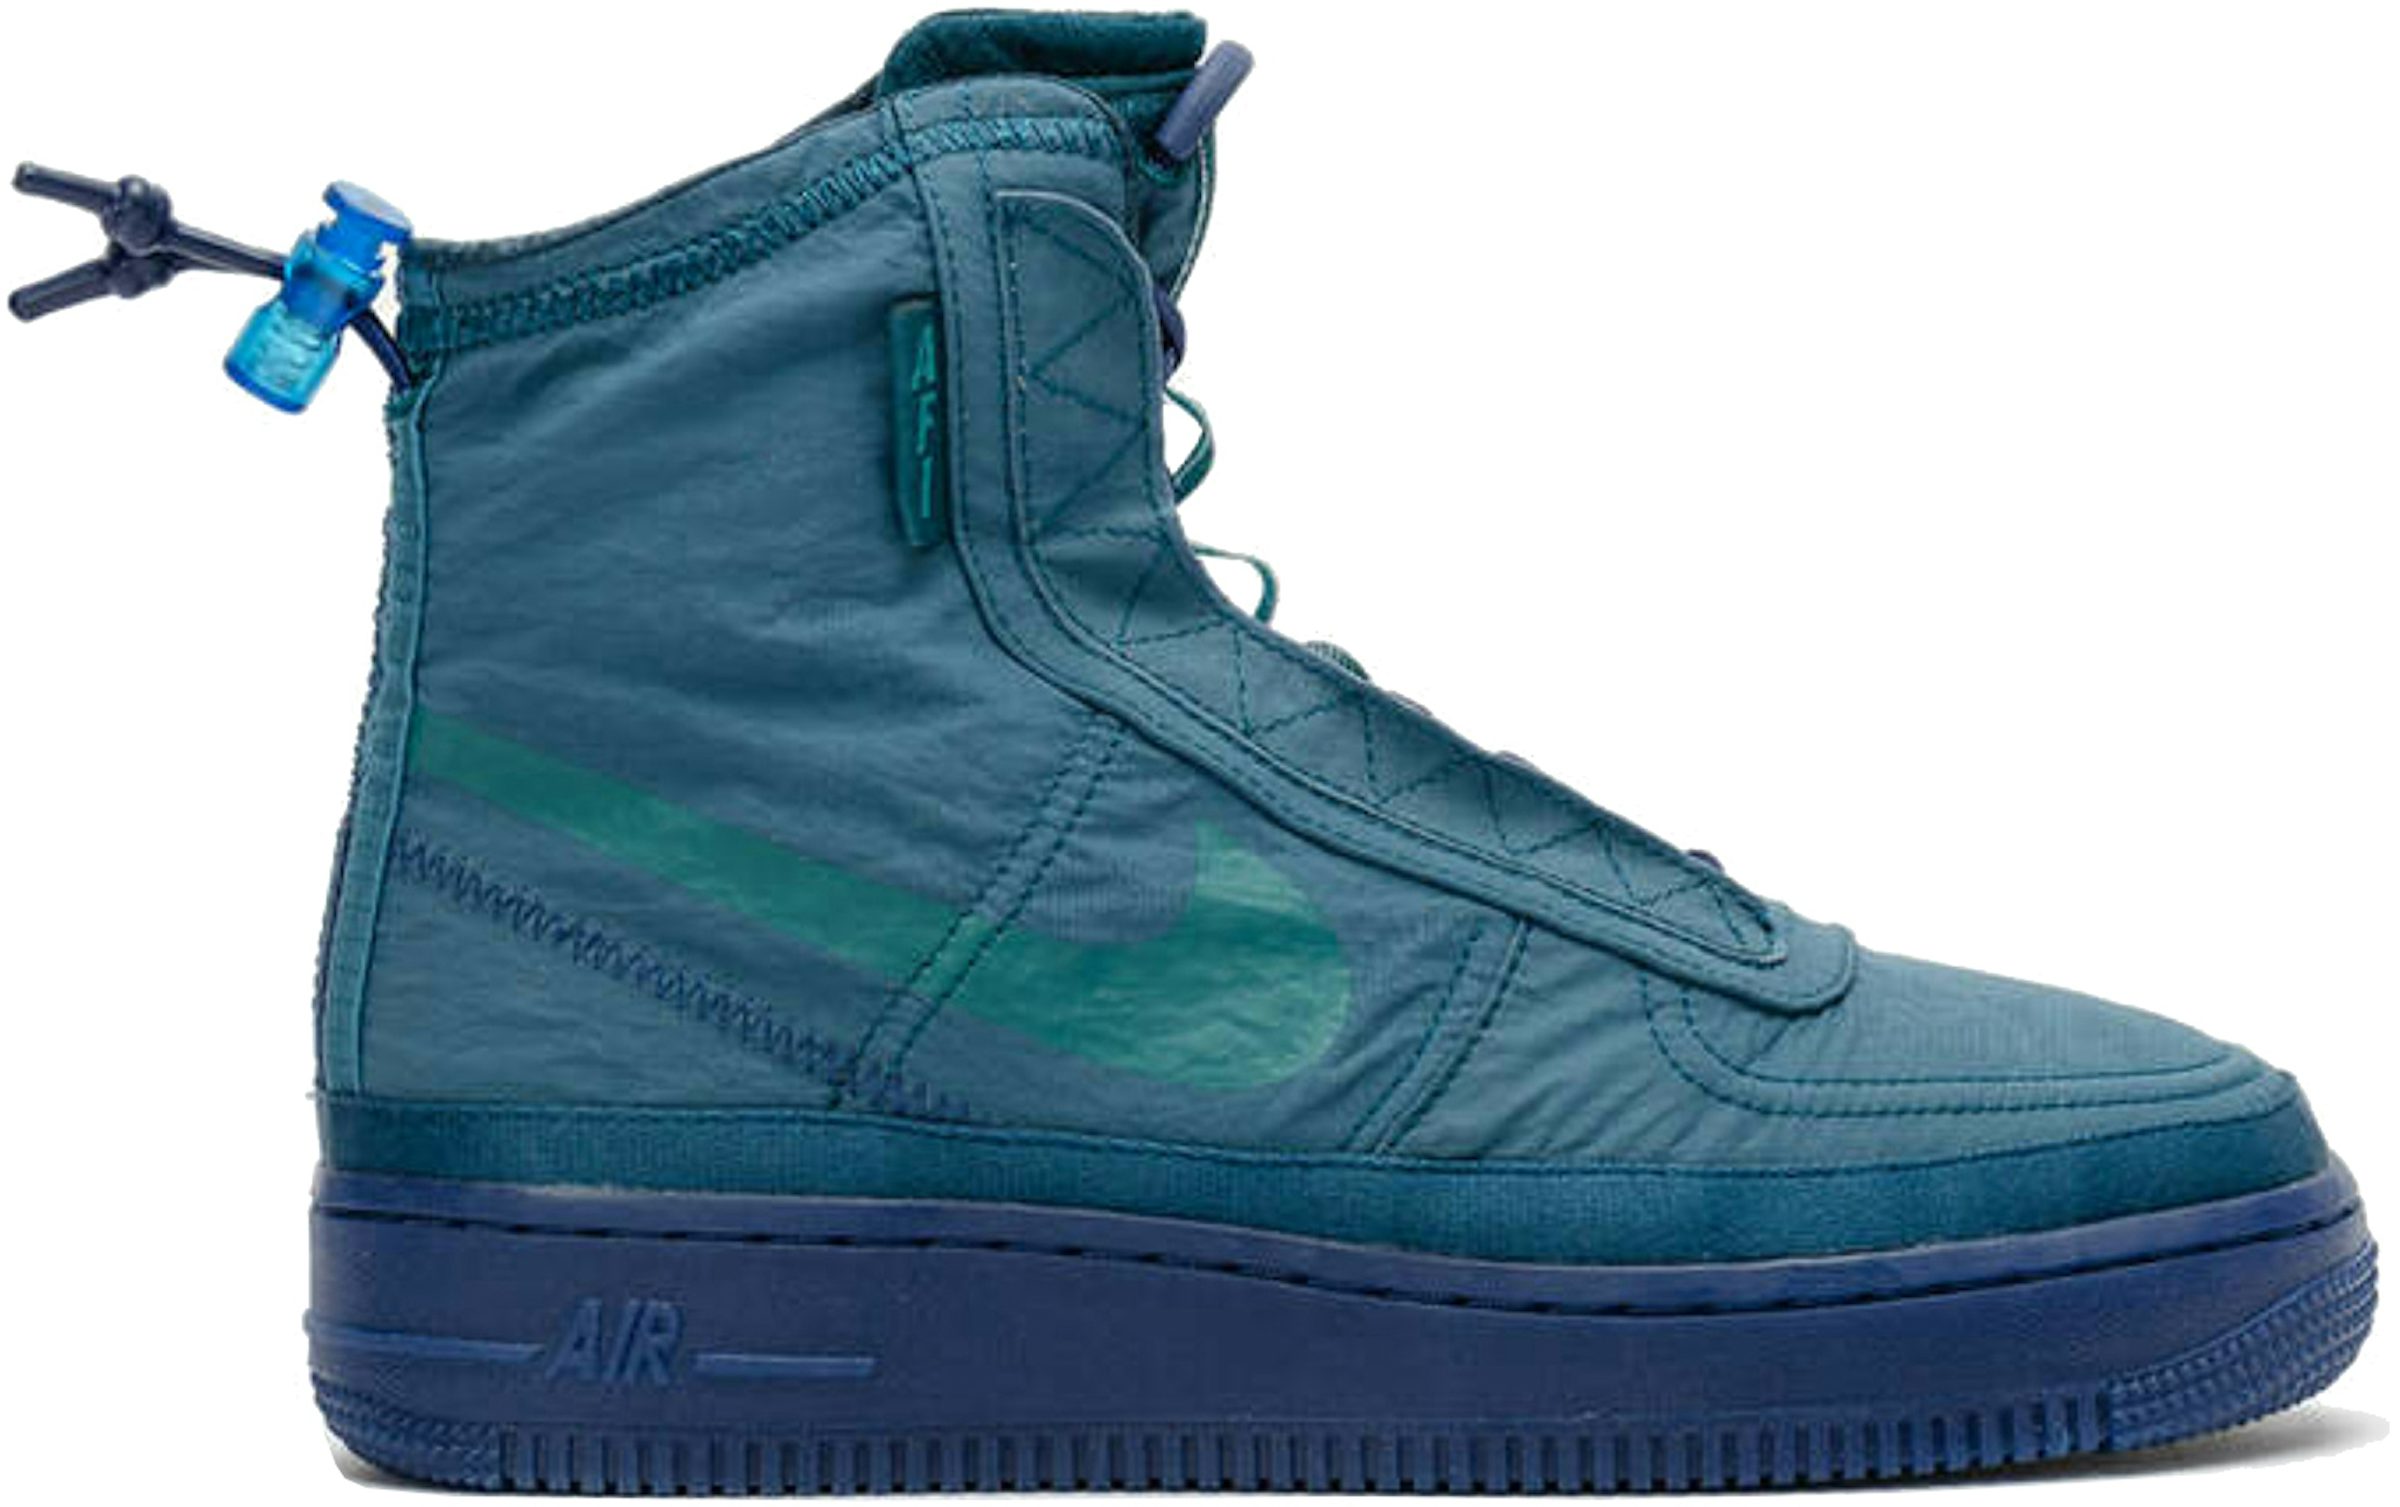 Paragraaf stap in Site lijn Nike Air Force 1 Shell Midnight Turquoise (Women's) - BQ6096-300 - US